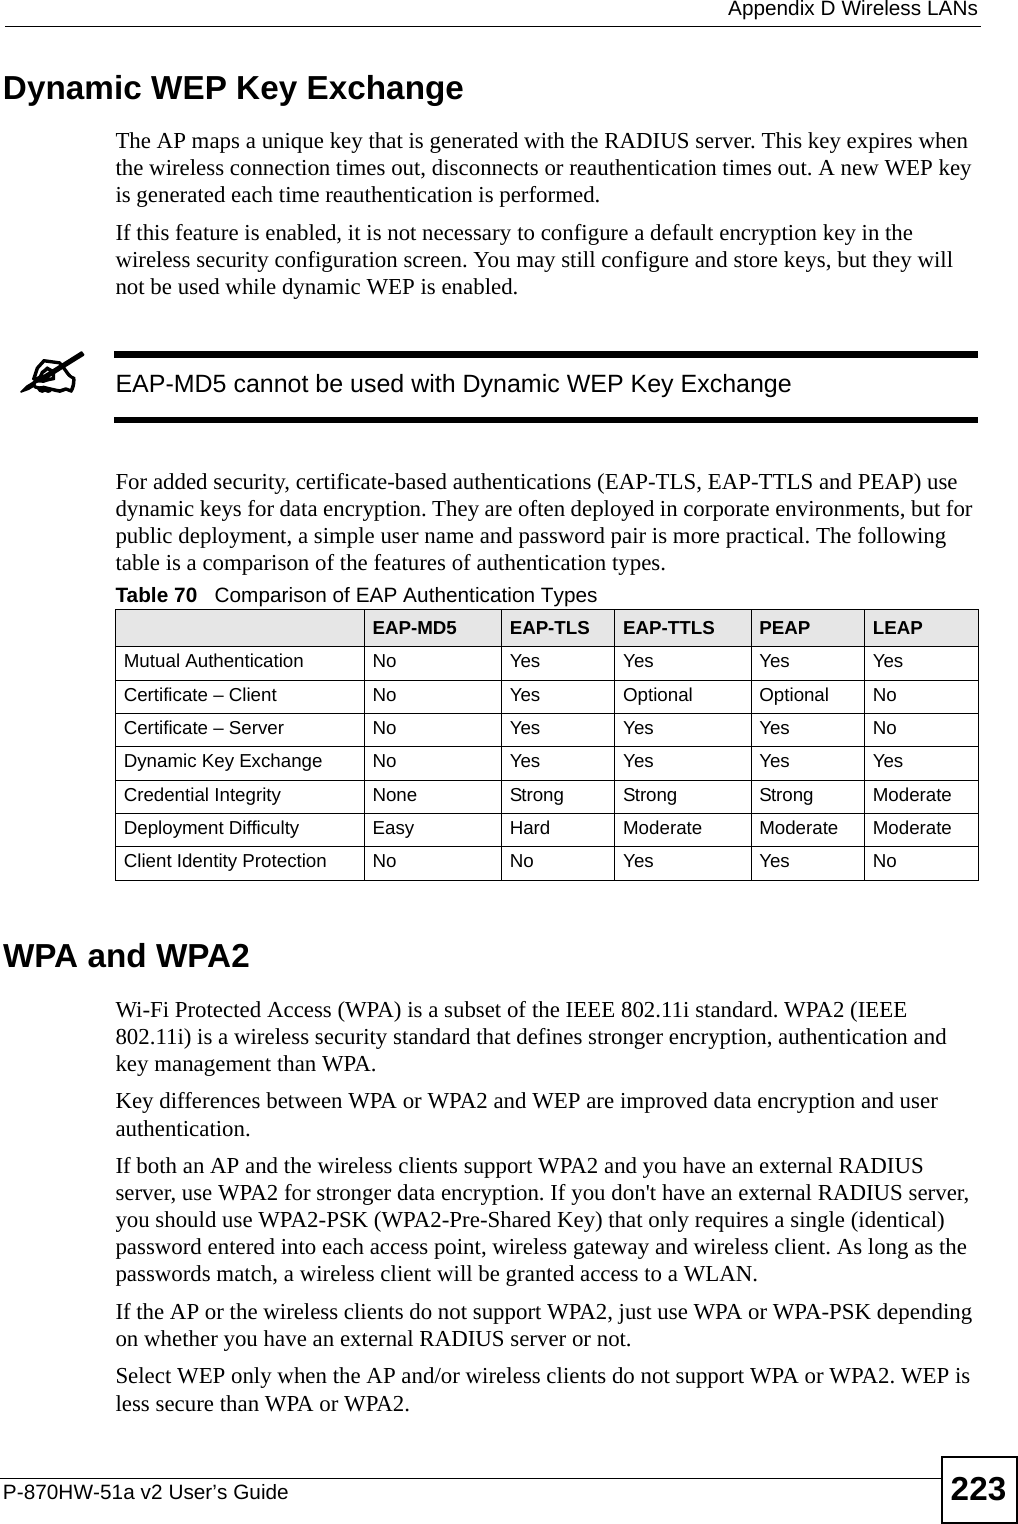  Appendix D Wireless LANsP-870HW-51a v2 User’s Guide 223Dynamic WEP Key ExchangeThe AP maps a unique key that is generated with the RADIUS server. This key expires when the wireless connection times out, disconnects or reauthentication times out. A new WEP key is generated each time reauthentication is performed.If this feature is enabled, it is not necessary to configure a default encryption key in the wireless security configuration screen. You may still configure and store keys, but they will not be used while dynamic WEP is enabled.&quot;EAP-MD5 cannot be used with Dynamic WEP Key ExchangeFor added security, certificate-based authentications (EAP-TLS, EAP-TTLS and PEAP) use dynamic keys for data encryption. They are often deployed in corporate environments, but for public deployment, a simple user name and password pair is more practical. The following table is a comparison of the features of authentication types.WPA and WPA2Wi-Fi Protected Access (WPA) is a subset of the IEEE 802.11i standard. WPA2 (IEEE 802.11i) is a wireless security standard that defines stronger encryption, authentication and key management than WPA. Key differences between WPA or WPA2 and WEP are improved data encryption and user authentication.If both an AP and the wireless clients support WPA2 and you have an external RADIUS server, use WPA2 for stronger data encryption. If you don&apos;t have an external RADIUS server, you should use WPA2-PSK (WPA2-Pre-Shared Key) that only requires a single (identical) password entered into each access point, wireless gateway and wireless client. As long as the passwords match, a wireless client will be granted access to a WLAN. If the AP or the wireless clients do not support WPA2, just use WPA or WPA-PSK depending on whether you have an external RADIUS server or not.Select WEP only when the AP and/or wireless clients do not support WPA or WPA2. WEP is less secure than WPA or WPA2.Table 70   Comparison of EAP Authentication TypesEAP-MD5 EAP-TLS EAP-TTLS PEAP LEAPMutual Authentication No Yes Yes Yes YesCertificate – Client No Yes Optional Optional NoCertificate – Server No Yes Yes Yes NoDynamic Key Exchange No Yes Yes Yes YesCredential Integrity None Strong Strong Strong ModerateDeployment Difficulty Easy Hard Moderate Moderate ModerateClient Identity Protection No No Yes Yes No